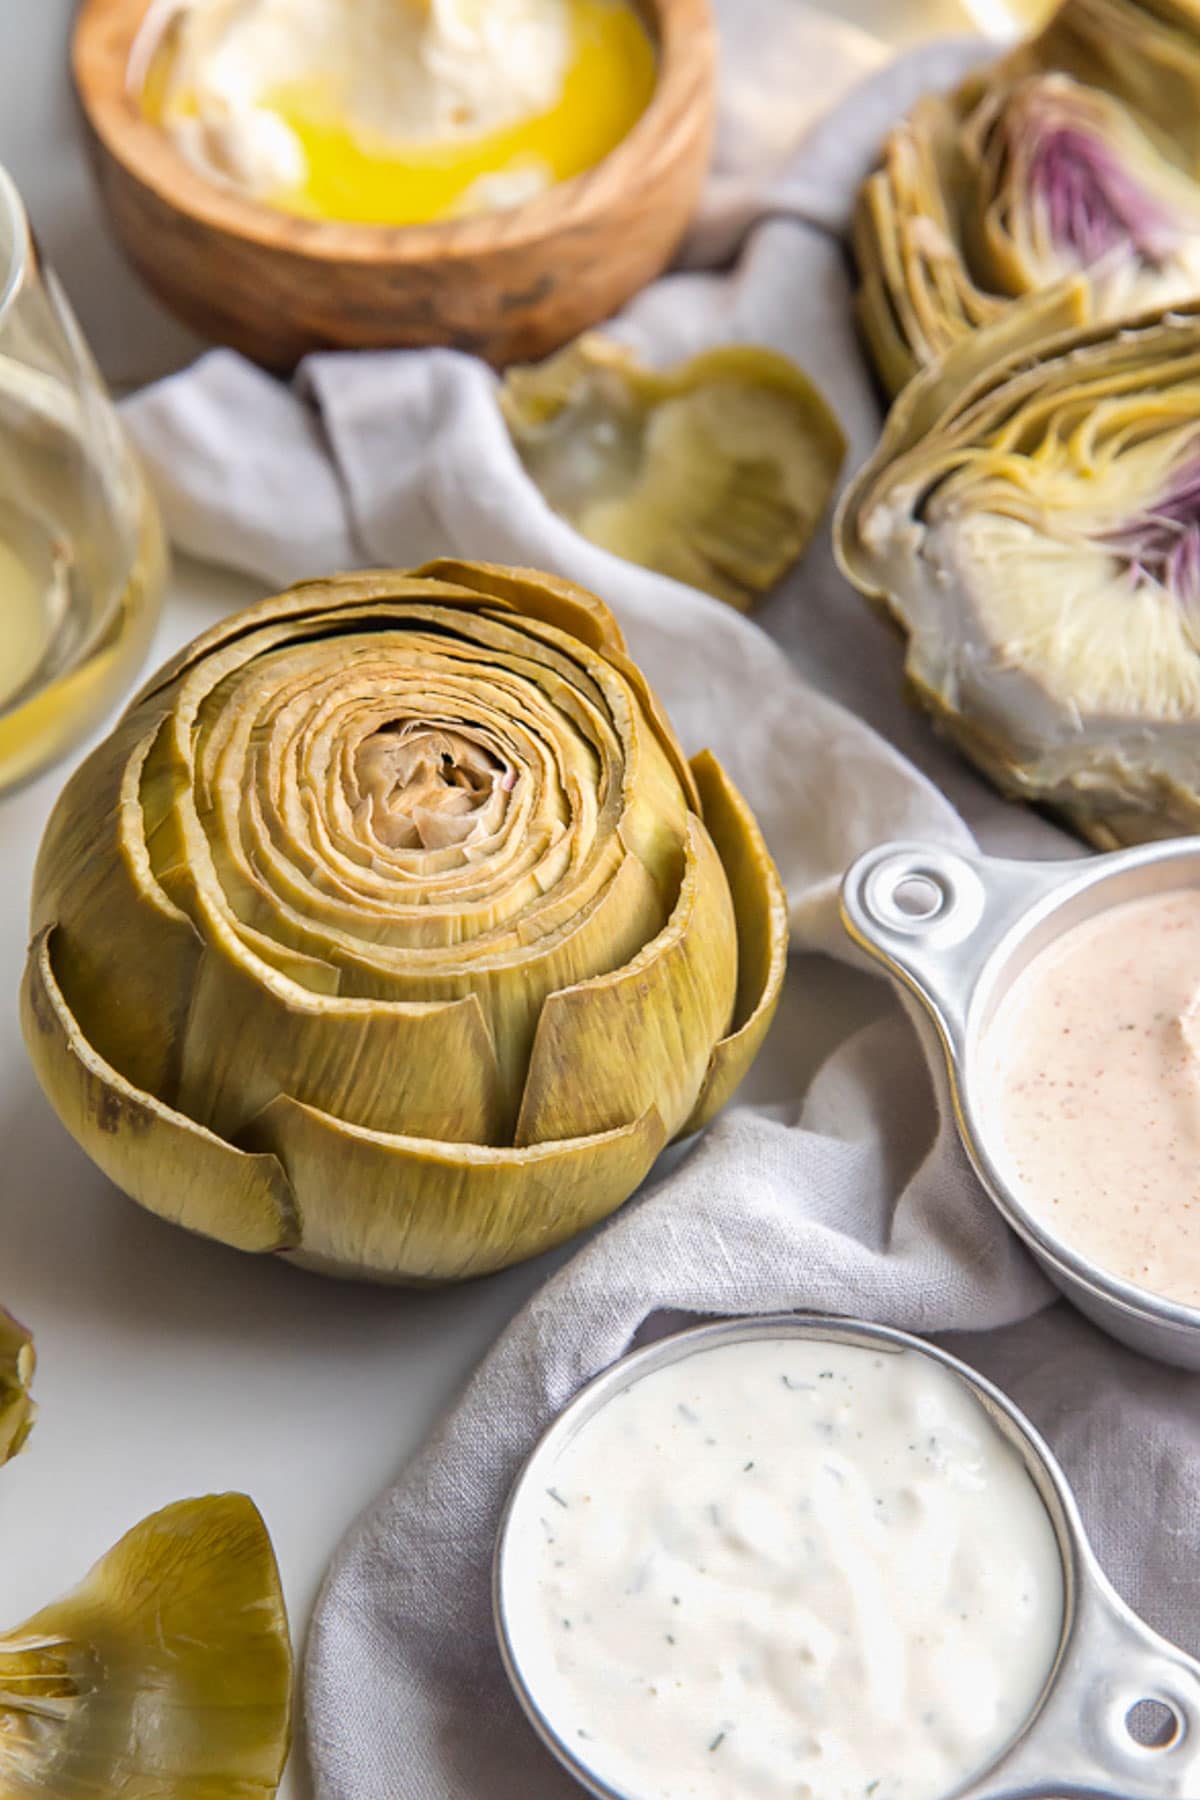 Boiled artichokes with three types of dipping sauces.